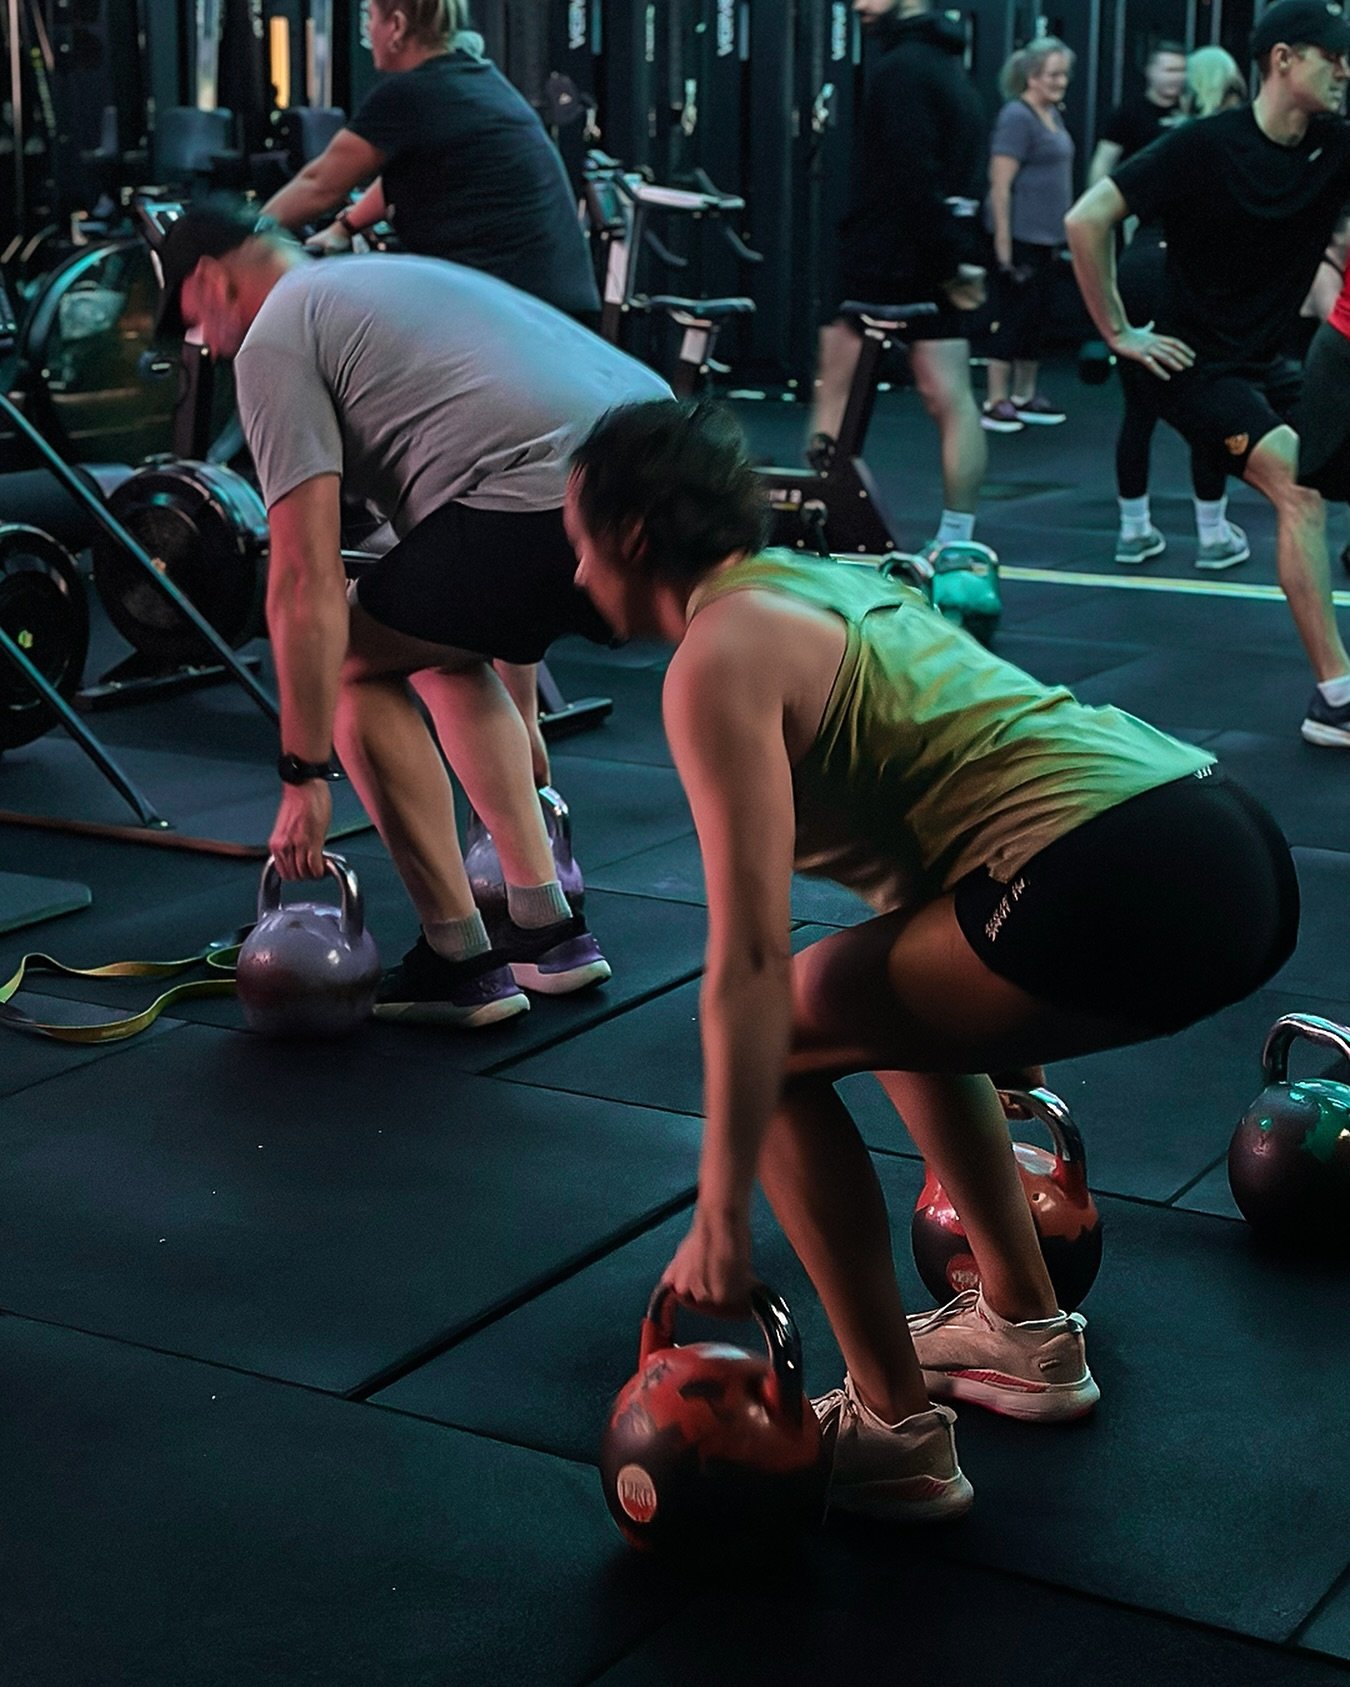 Don&rsquo;t be fooled, the SWEATY side still uses weights and cable machines! Why? Because you can elevate your heart rate and increase your cardiovascular capacity by doing more than just running!